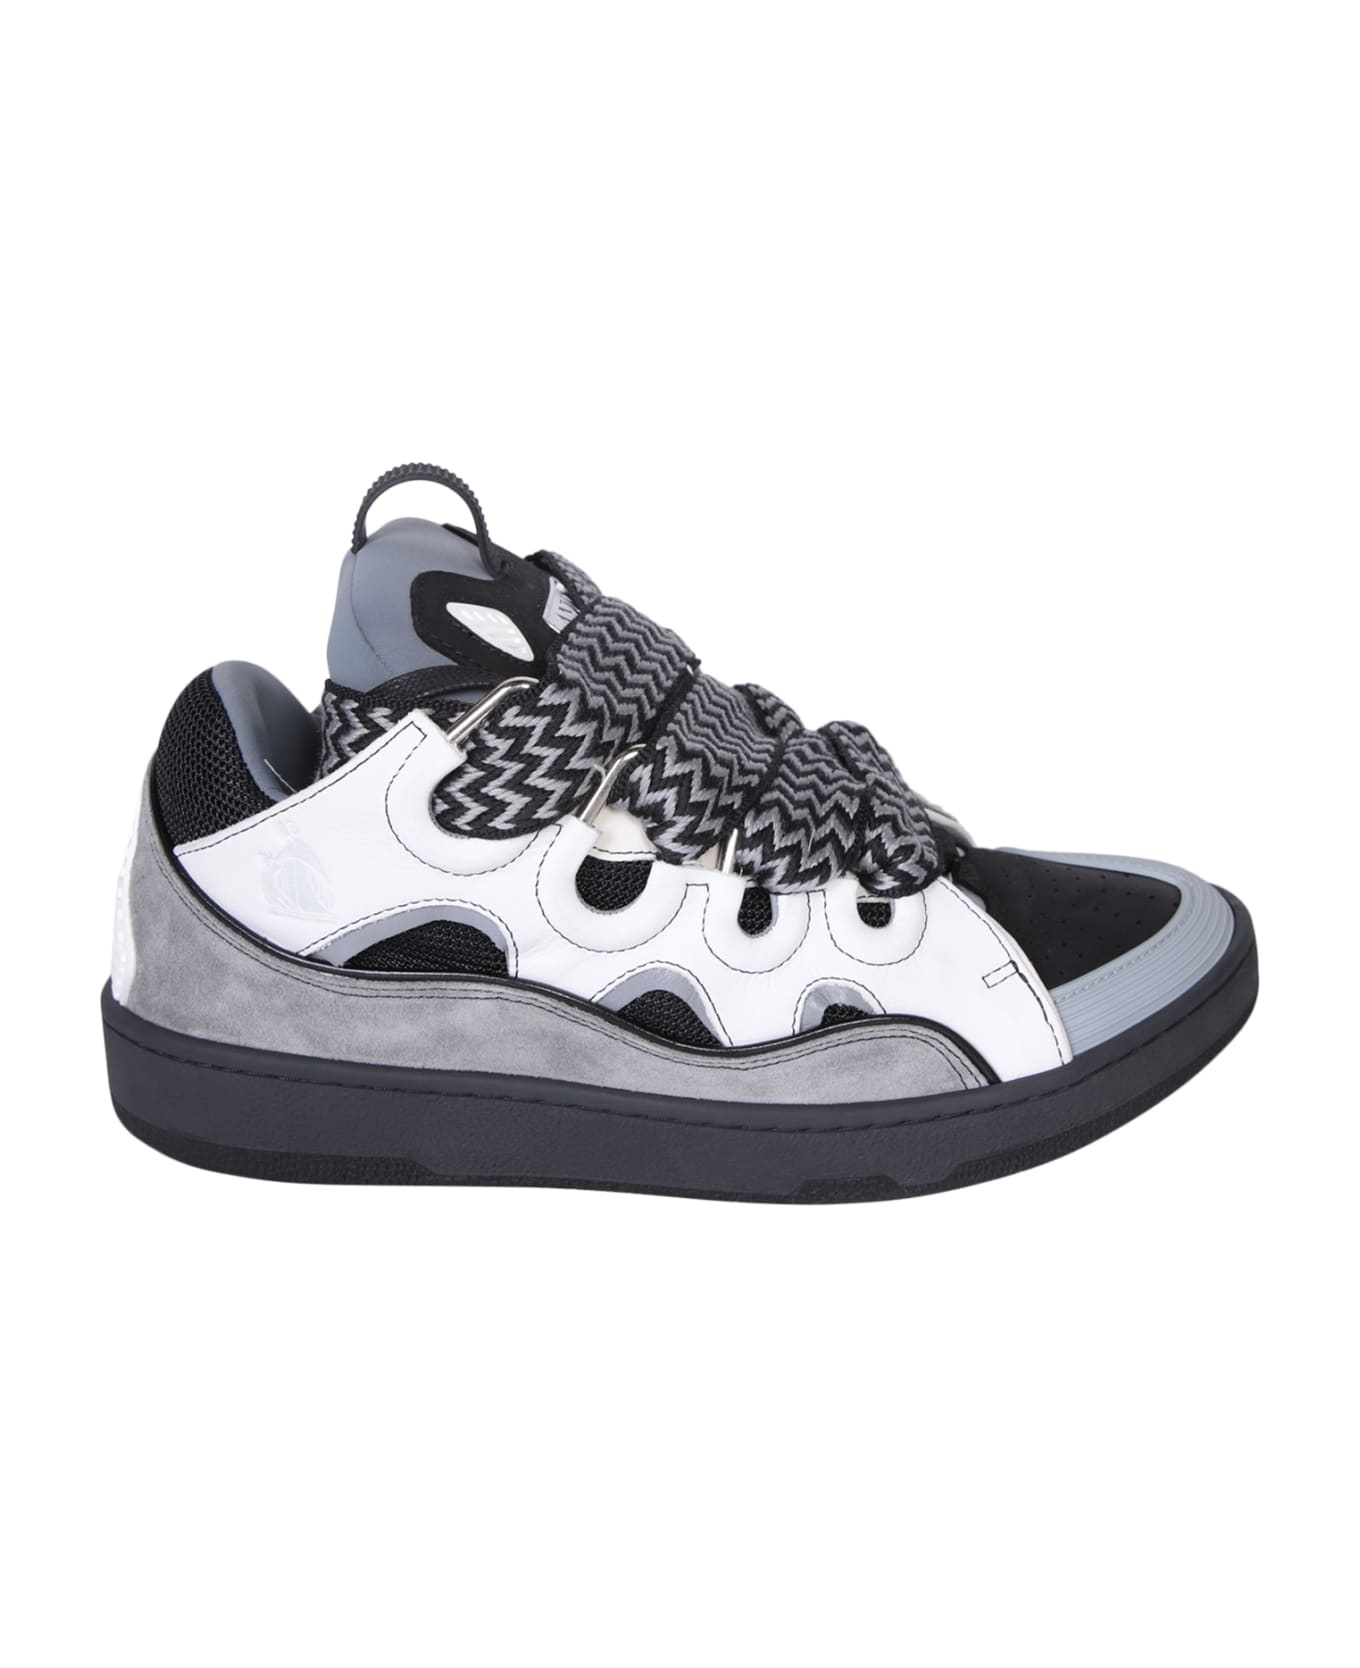 Curb White/grey Sneakers - 1